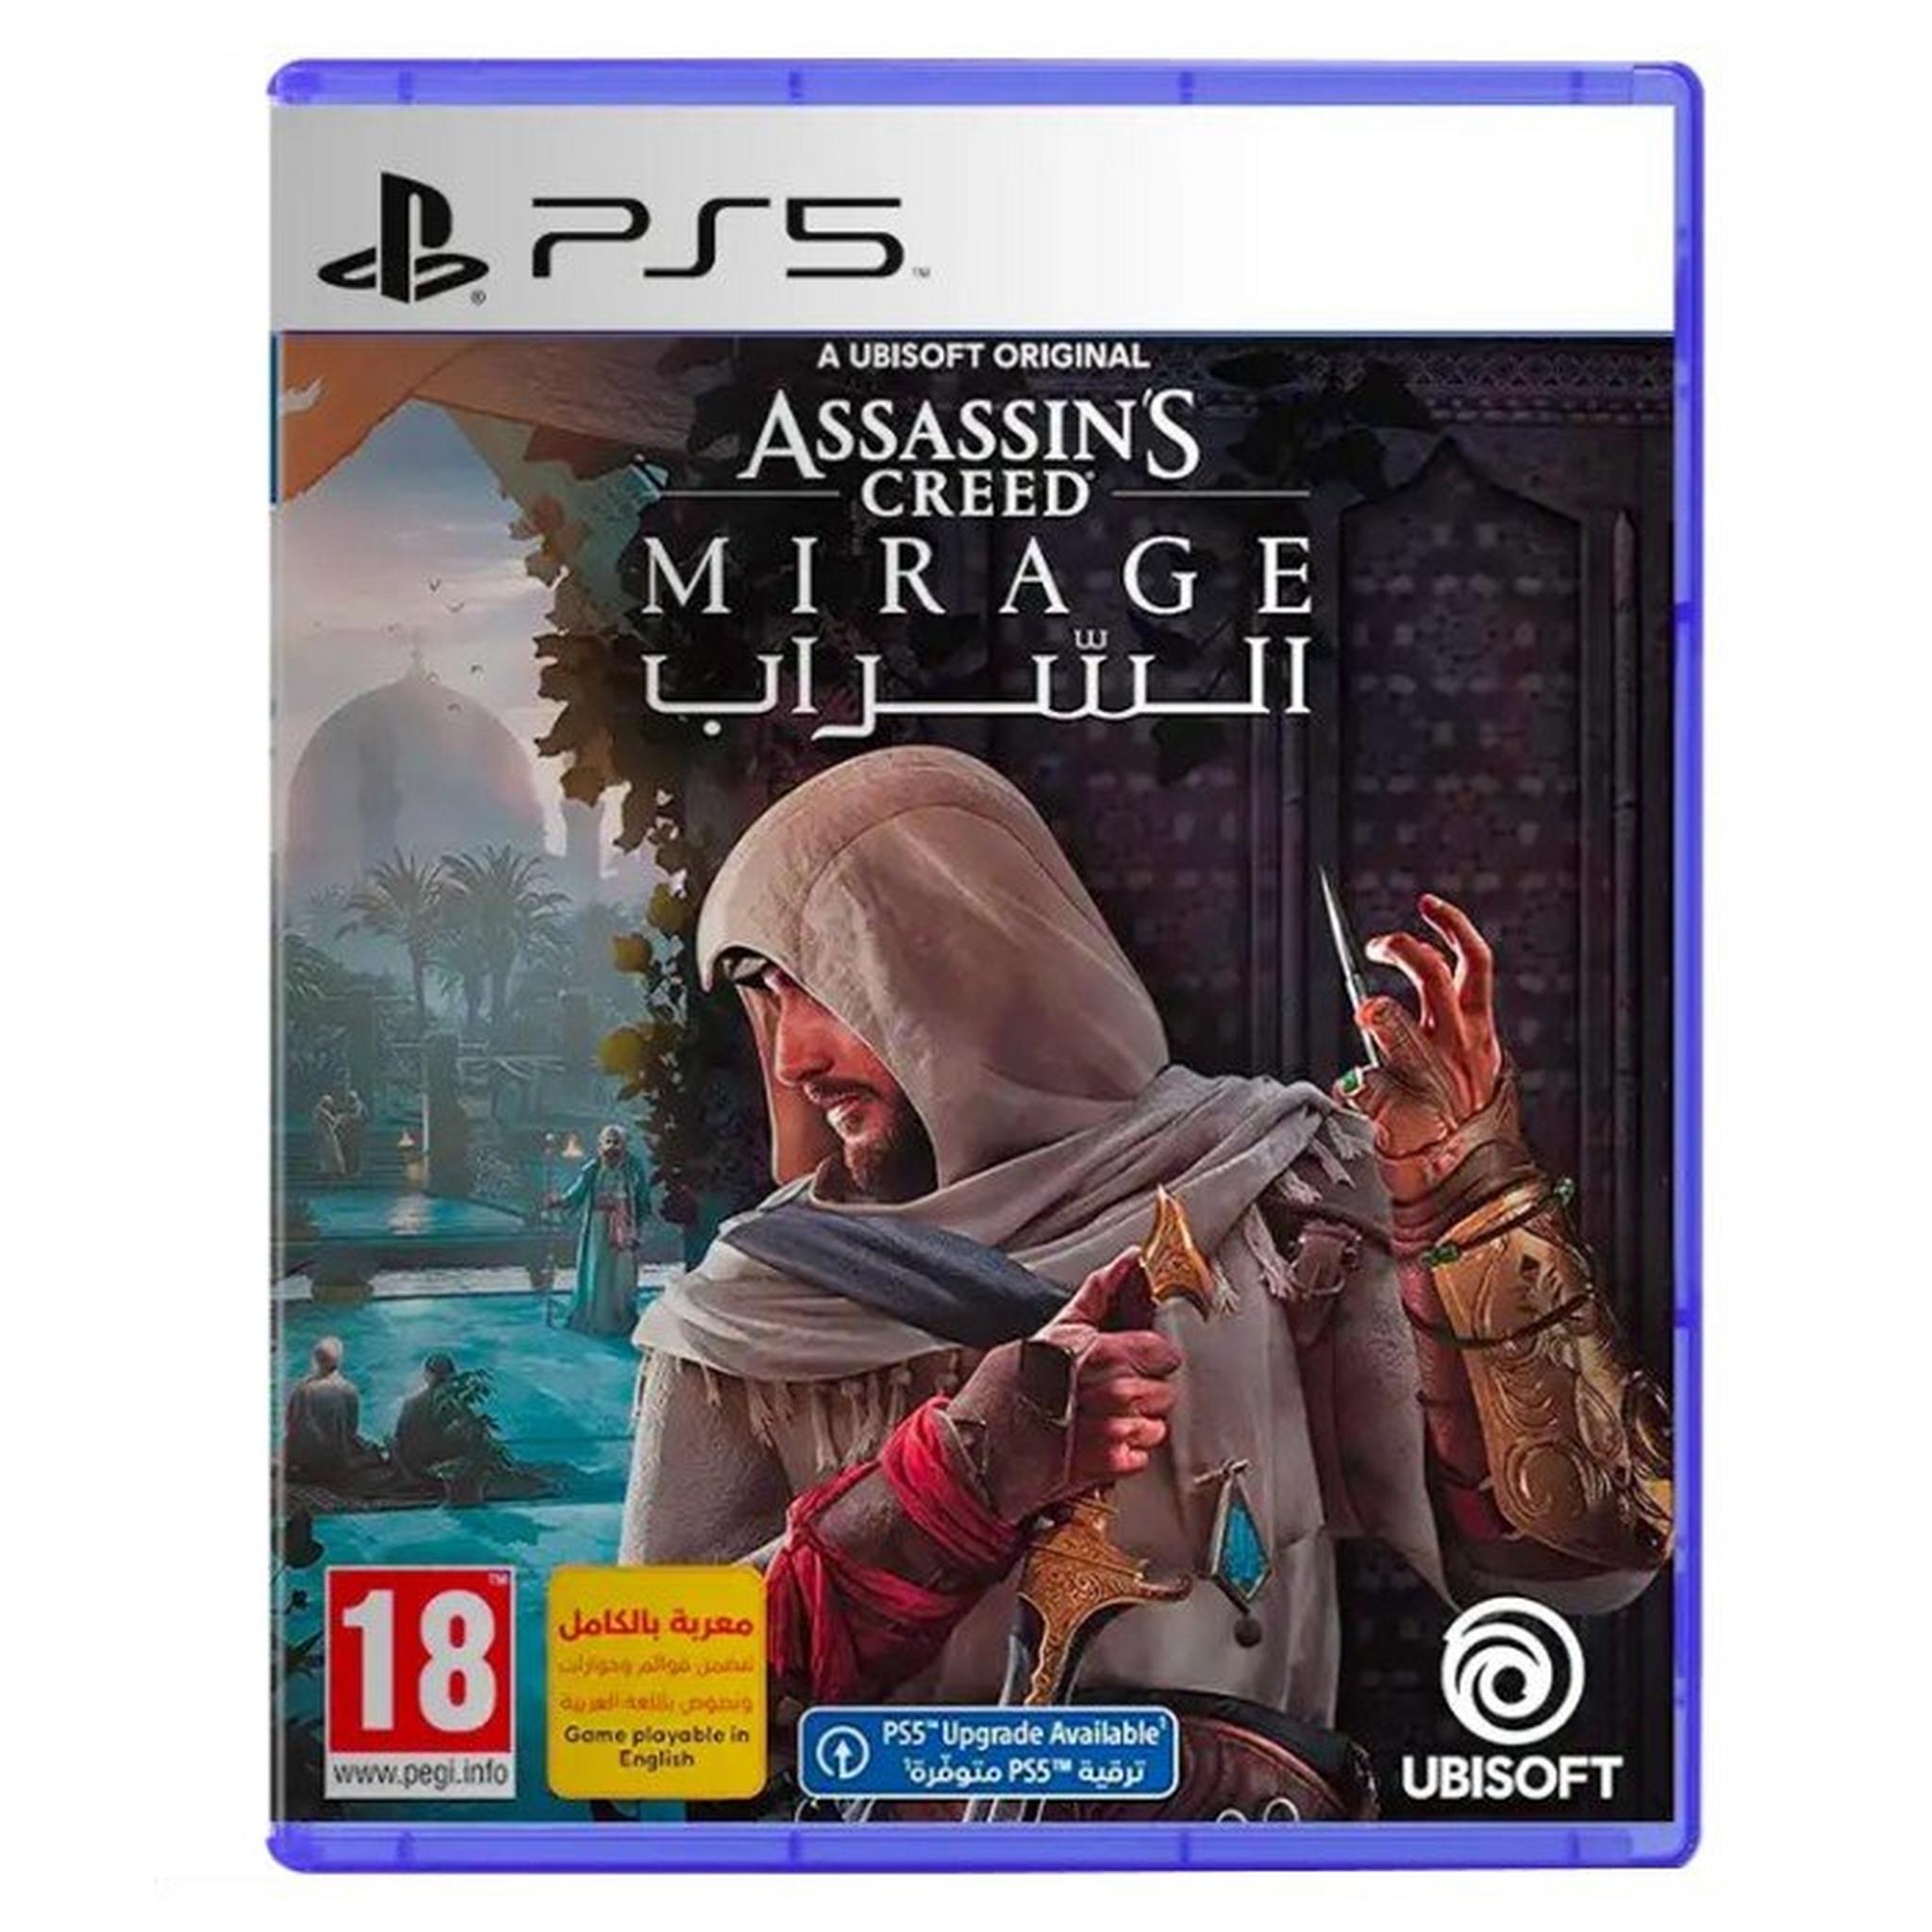 SONY Assassins Creed Mirage Standard Edition  PlayStation 5 Game - PS5-ACM-STD